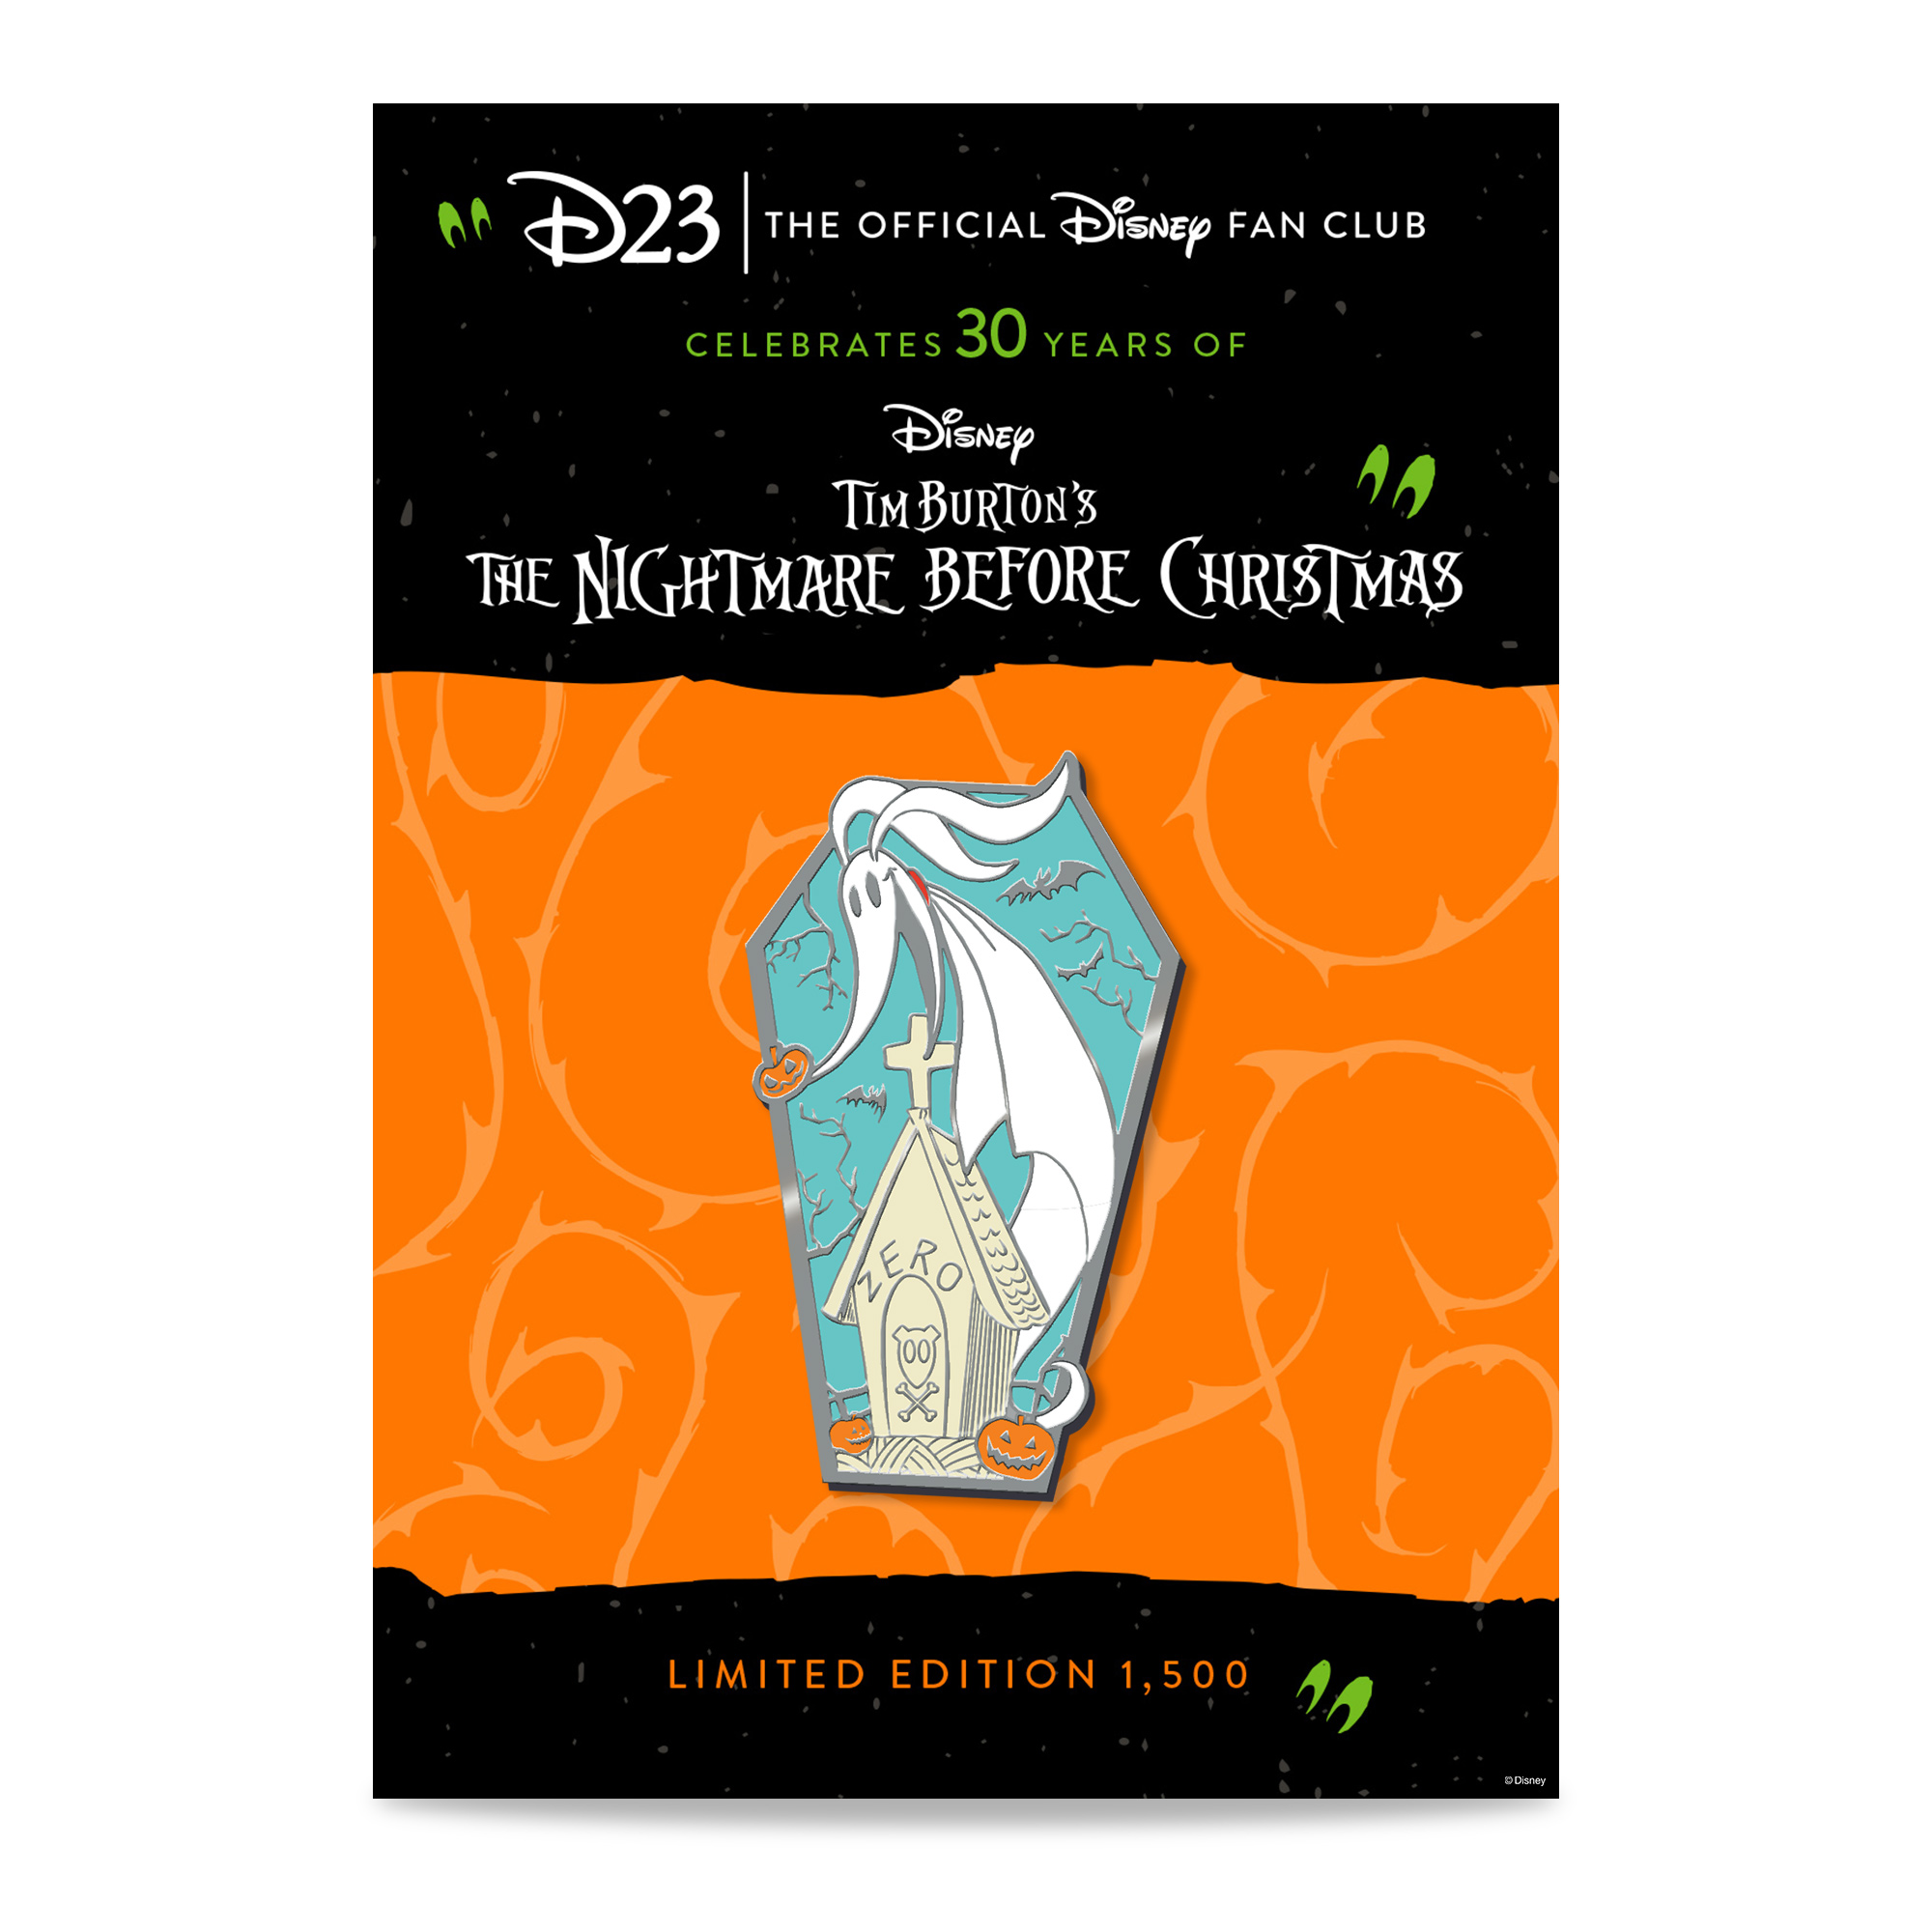 Artwork featuring D23-exclusive Tim Burton’s The Nightmare Before Christmas 30th Anniversary Pin. The artwork of the pin is blue, orange, white, and tan with silver elements, inspired by Zero the ghostly dog and his adorable doghouse, inside of a coffin shape. The pin is set on a backer card with orange and black Halloween designs.